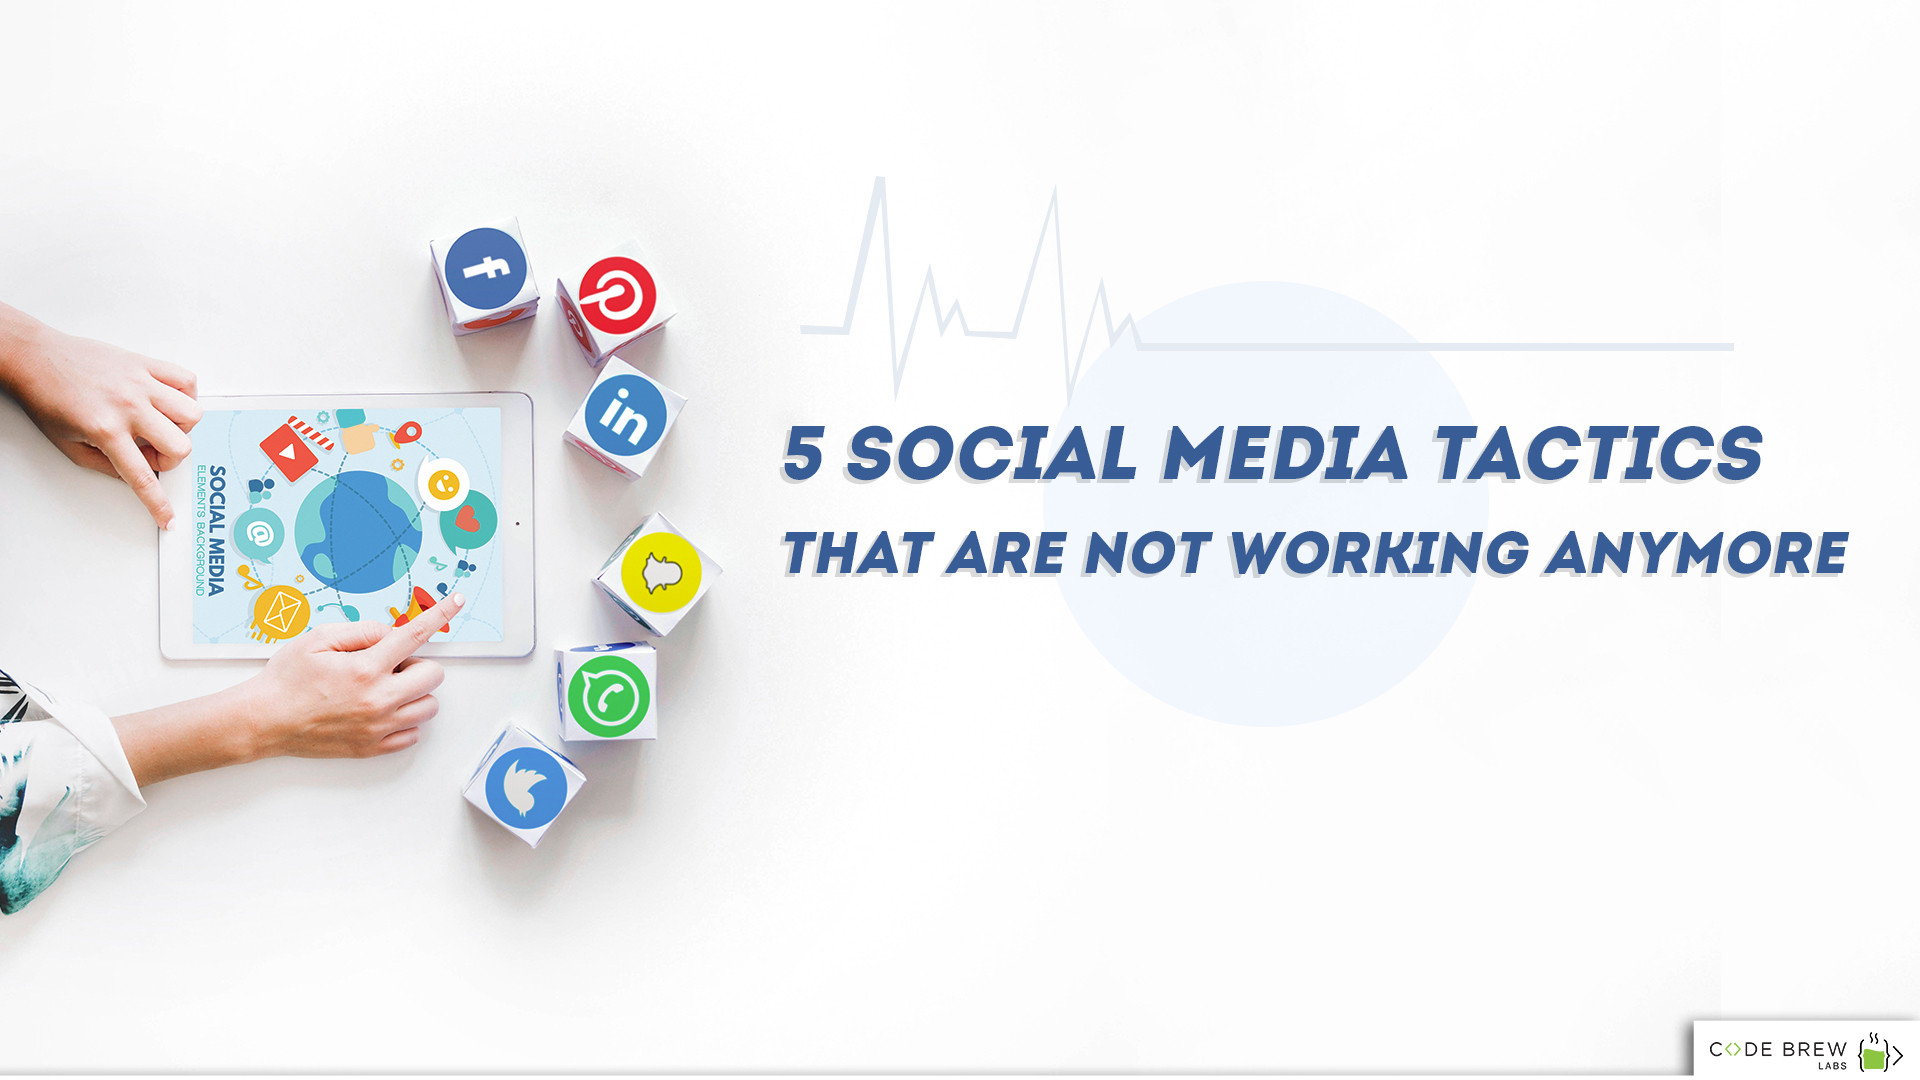 5 Social Media Tactics That Are Not Working Anymore